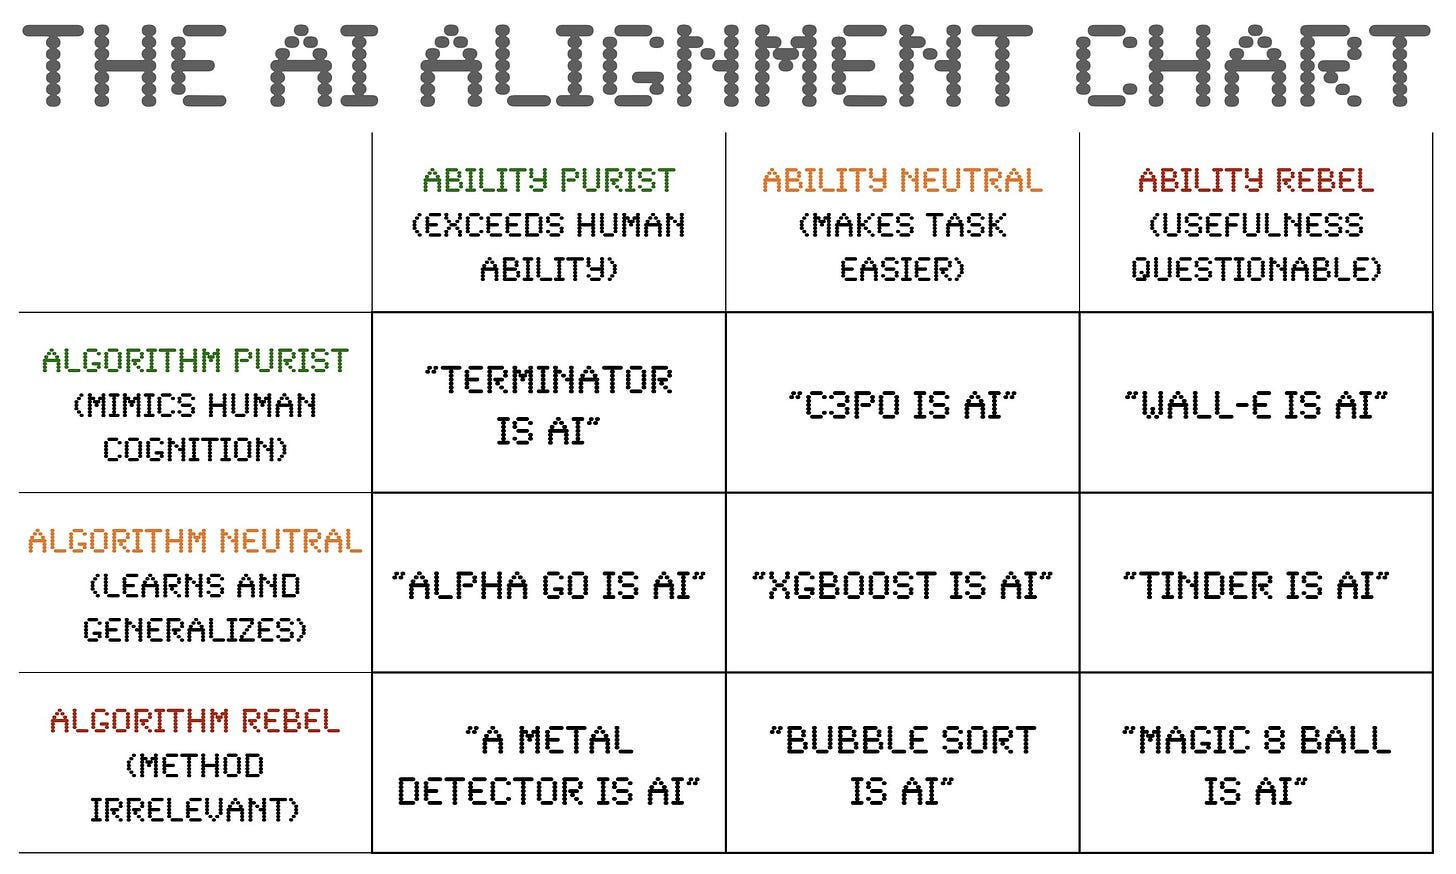 Table with 3 rows and 3 columns.
Rows: (1) Algorithm purist (mimic human cognition), (2) Algorithm netural (learns & generalizes), (3) Algorithm rebel (method irrelevant)
Cols: (1) Ability purist (exceeds human ability), (2) Ability neutral (makes task easier), (3) Ability rebel (usefullness questionable)
Cells:
[1,1] "Terminator is AI" [1,2] "C3PO is AI" [1,3] "WALL-E is AI"
[2,1] "AlphaGo is AI" [2,2] "XGBOOST is AI" [2,3] "Tinder is AI"
[3,1] "A metal detector is AI" [3,2] "Bubble sort is AI" [3,3] "Magic 8 Ball is AI"